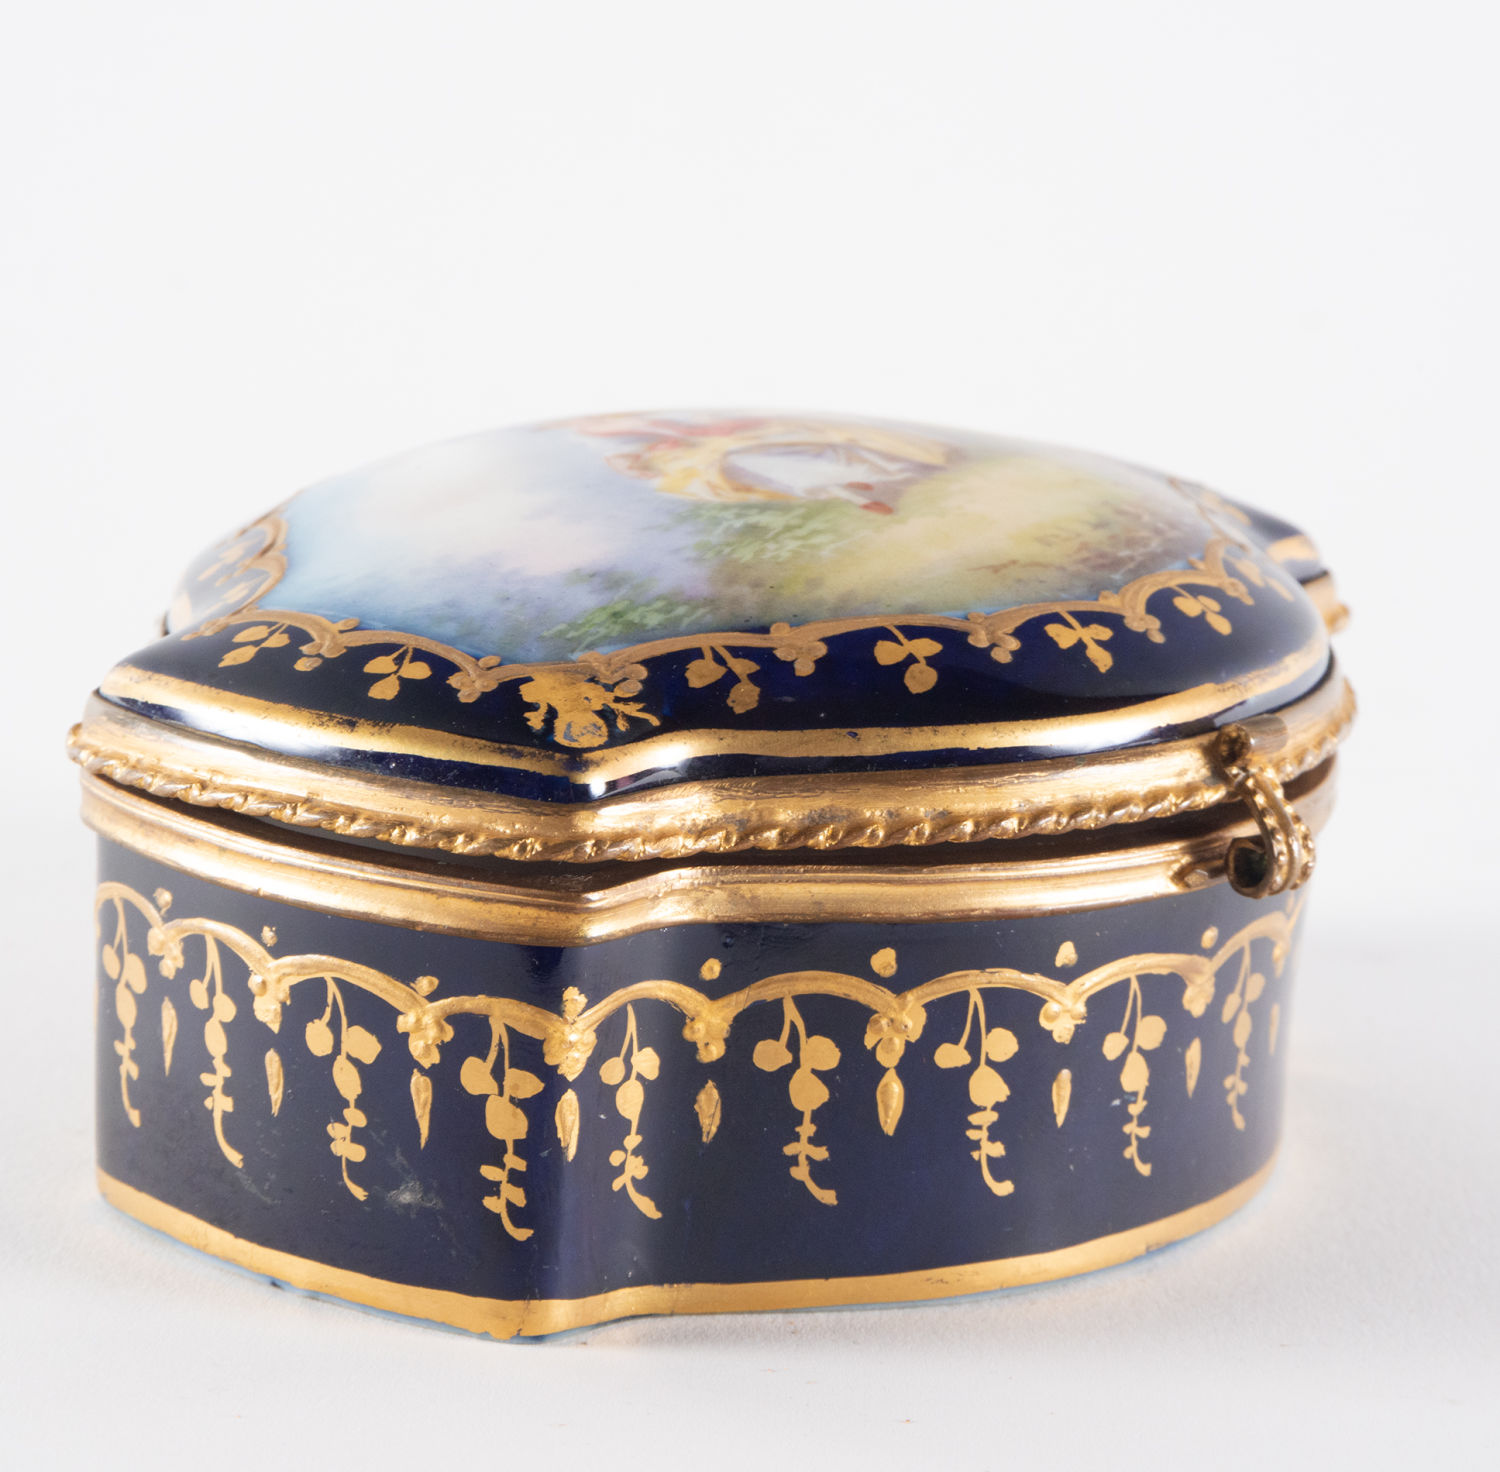 Enamelled Sèvres porcelain jewelry box, 19th century, Tuileries series - Image 4 of 5